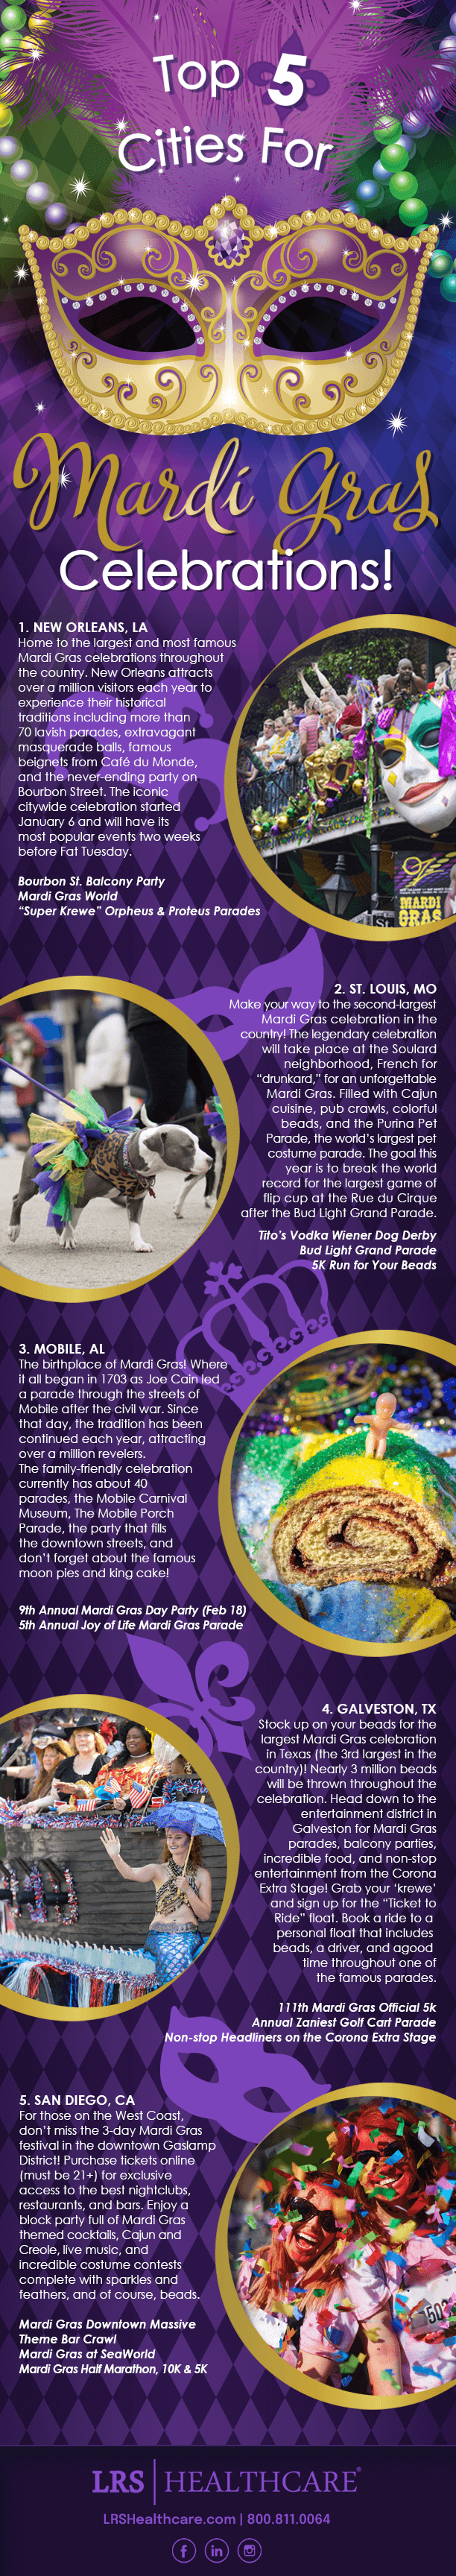 Top cities in the U.S. for Mardi Gras celebrations